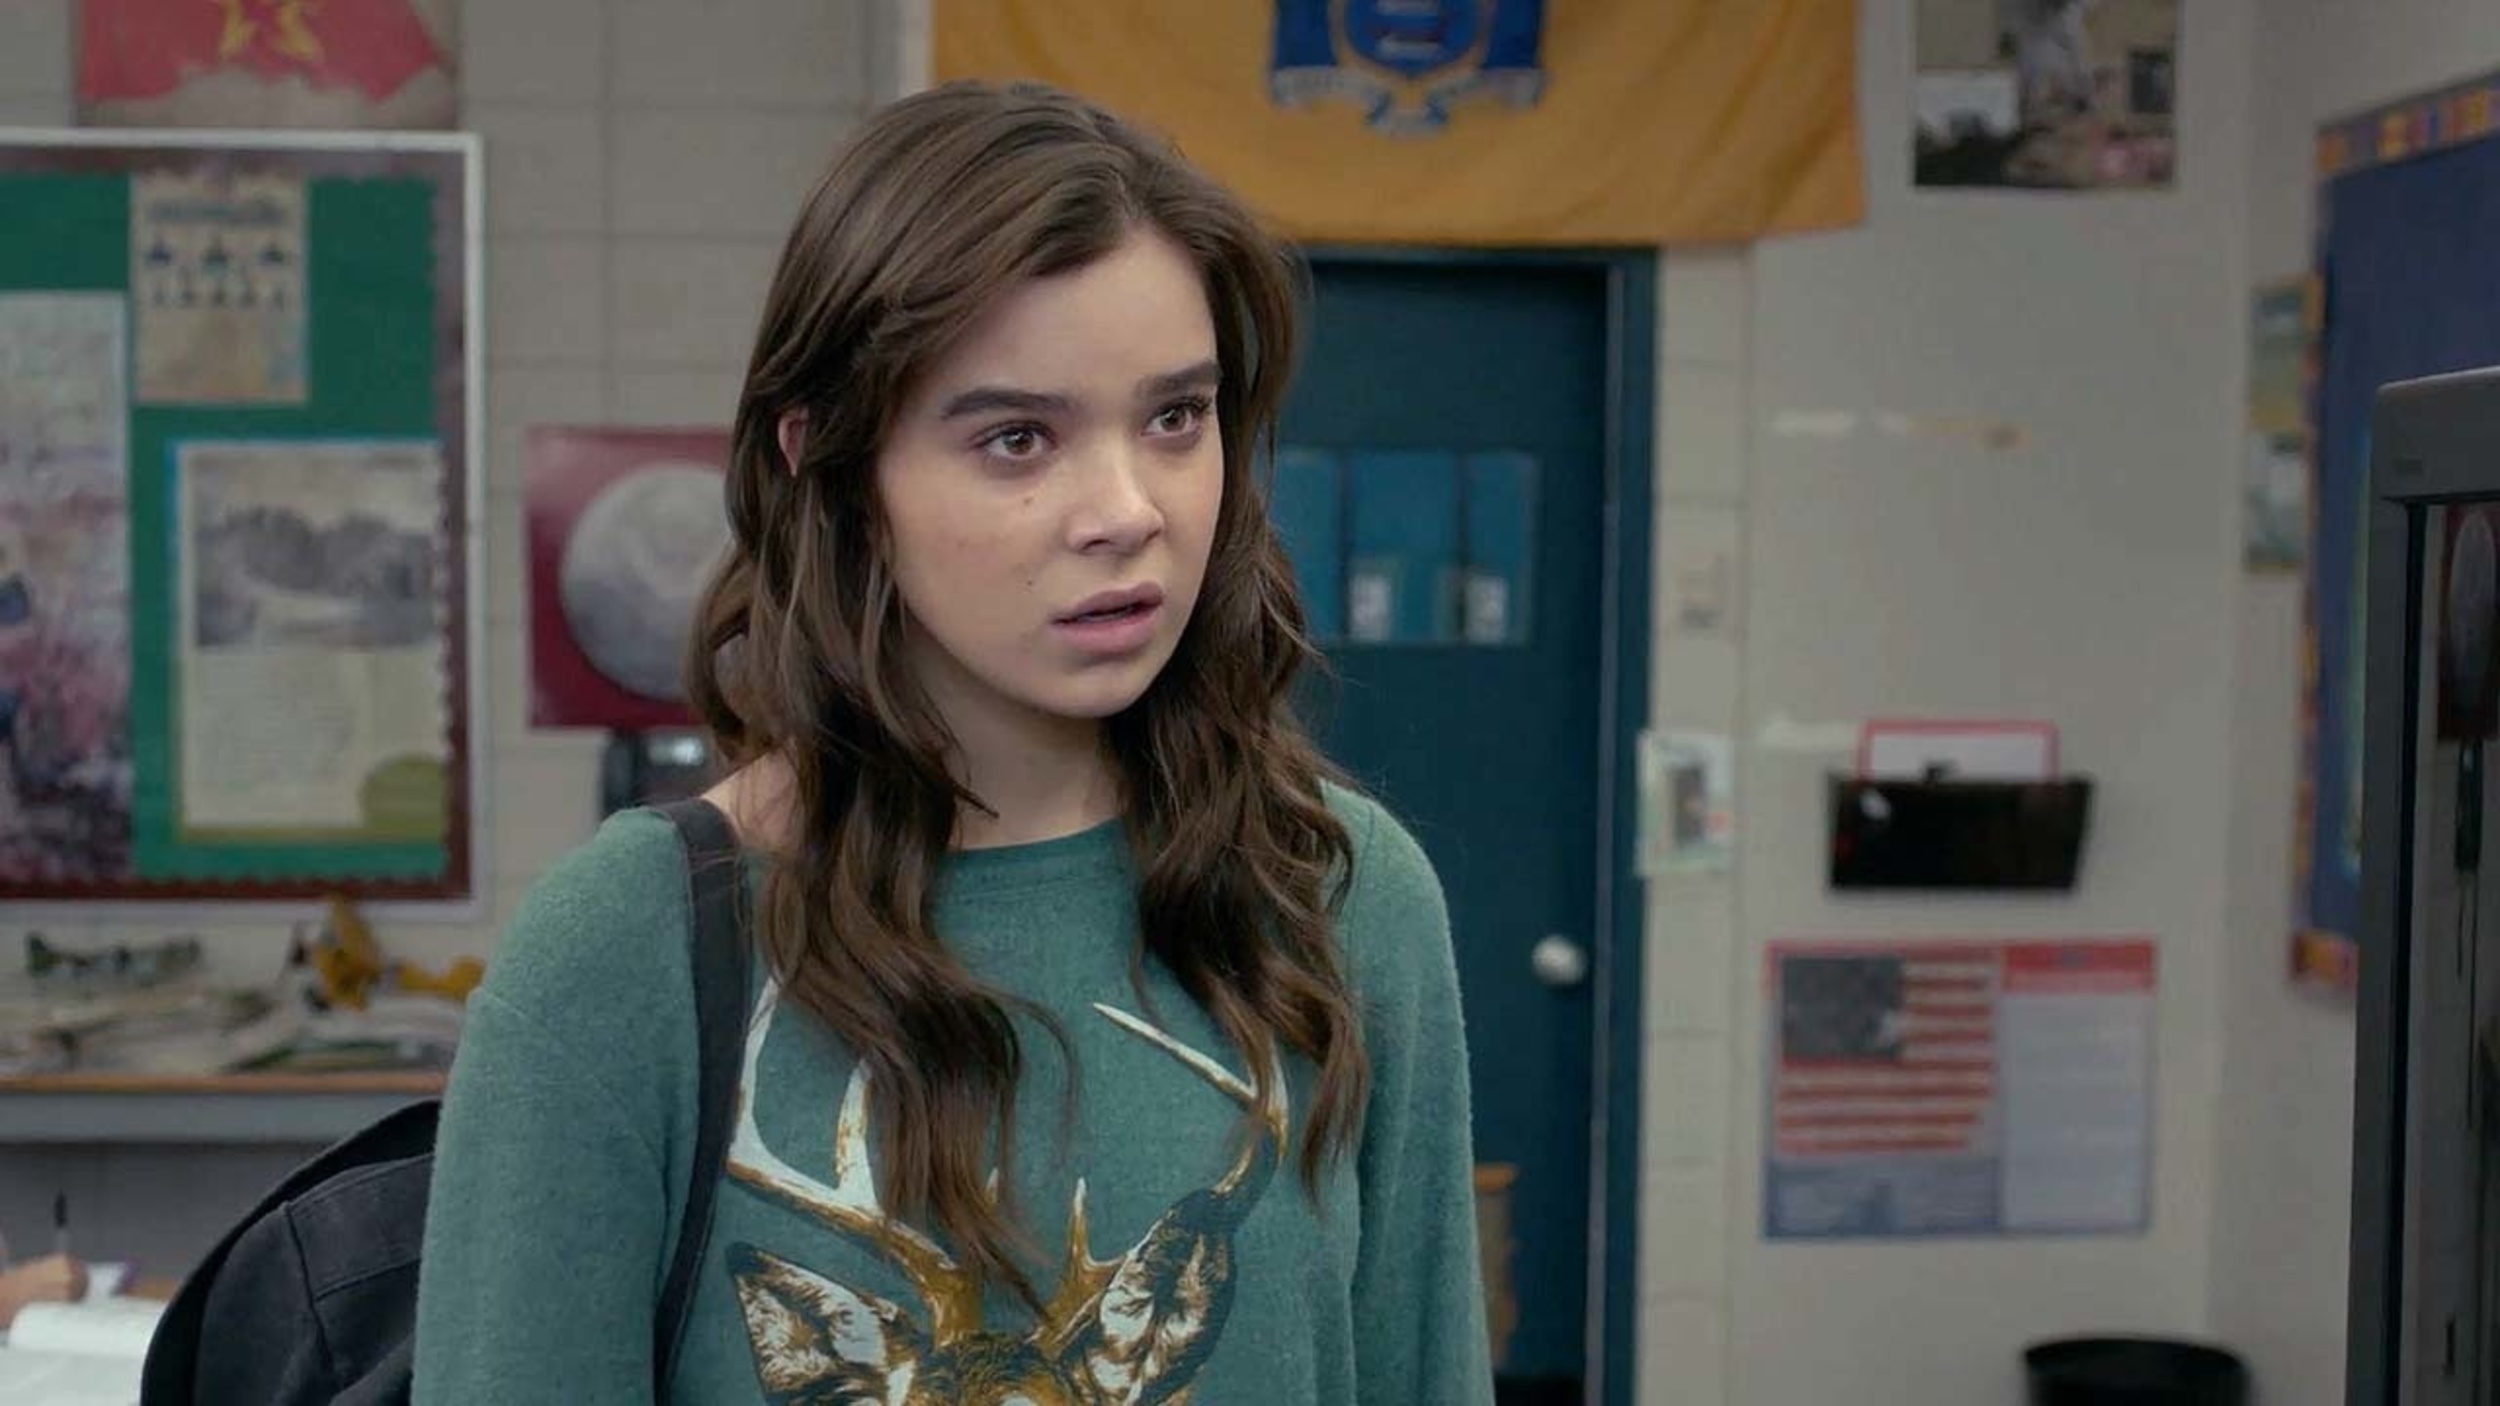 <p>Hailee Steinfeld does a nice in the lead role as <a href="https://www.youtube.com/watch?v=EB6Gecy6IP8">high school outcast Nadine</a>, who seems fine not wanting to fit in or conform to teenage norms. Nadine endures everything from selfishness to naïveté to jealousy, which makes for a genuine and honest picture. Woody Harrelson also shines as her high school teacher and confidant.  </p>